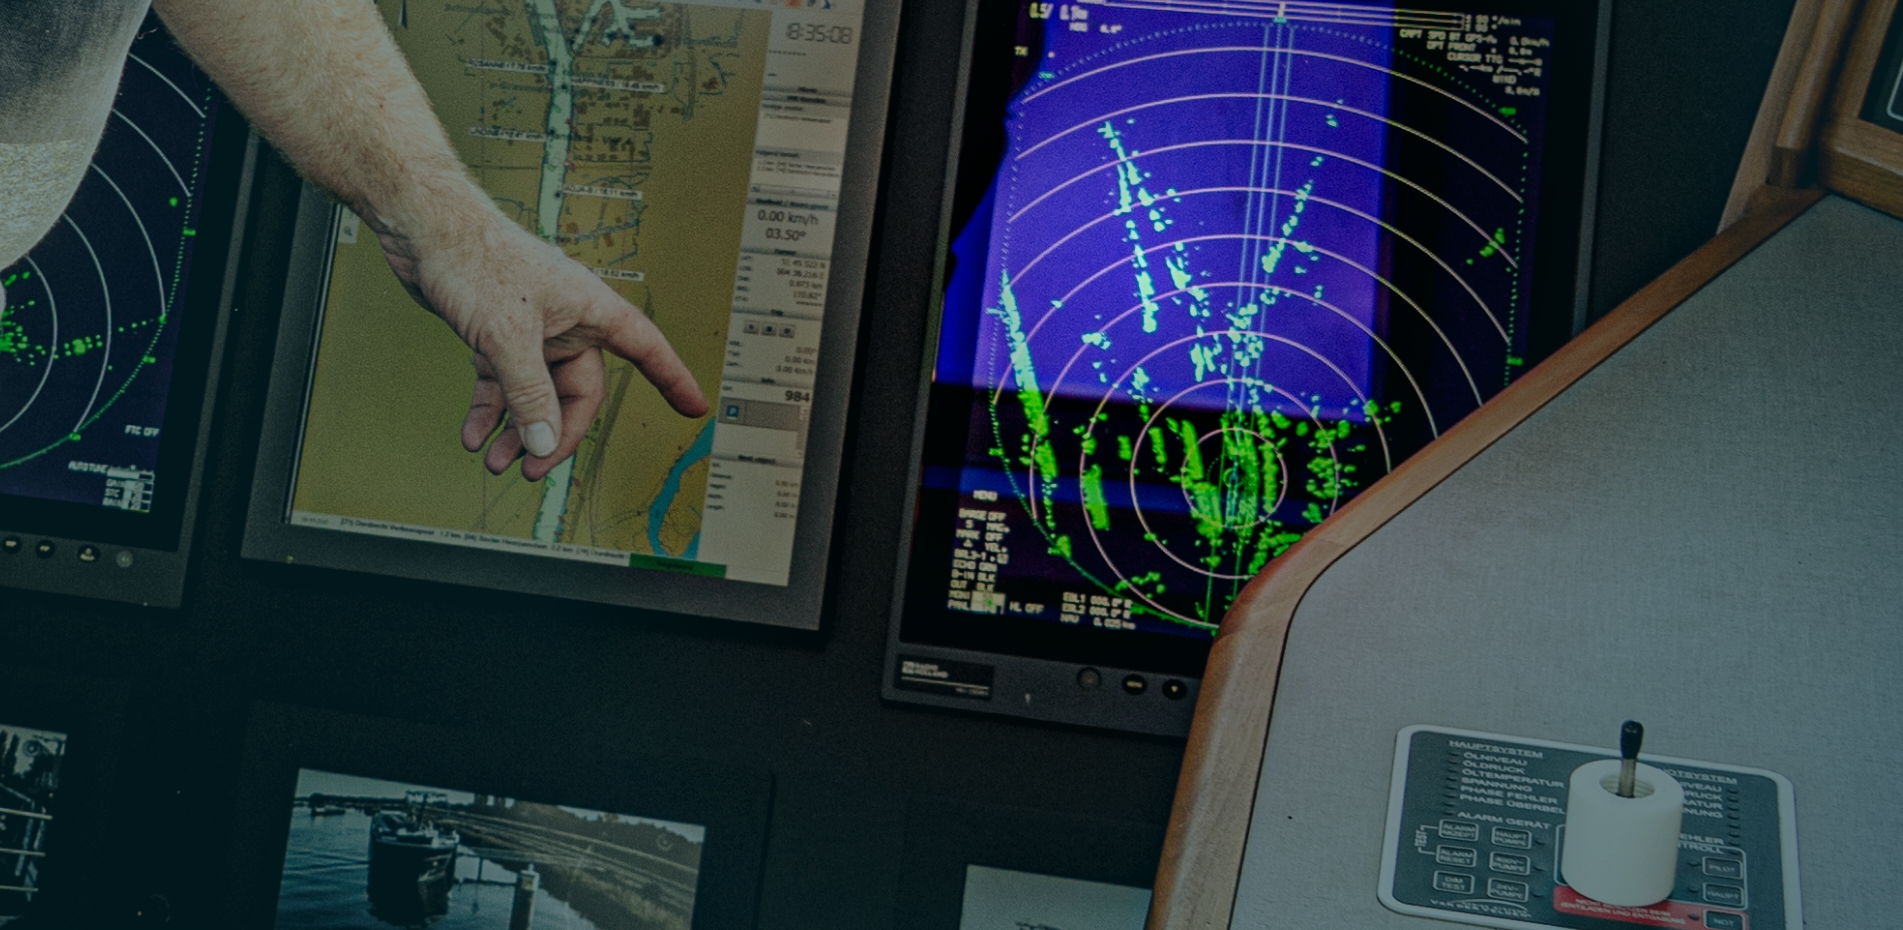 Captain points to a monitor in the command bridge